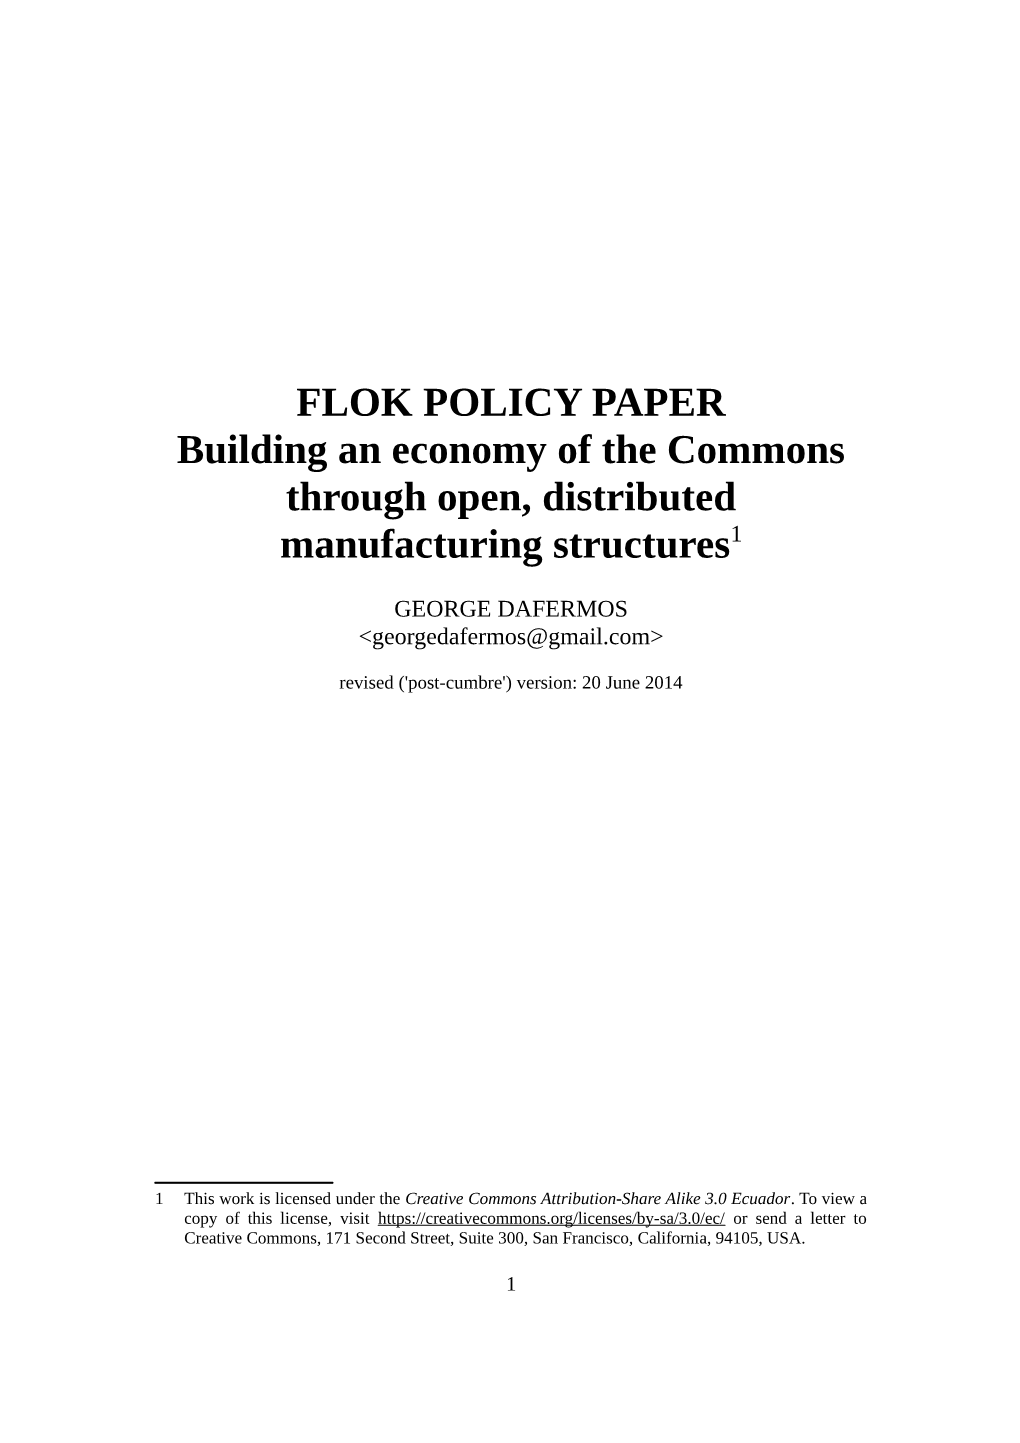 FLOK POLICY PAPER Building an Economy of the Commons Through Open, Distributed Manufacturing Structures1